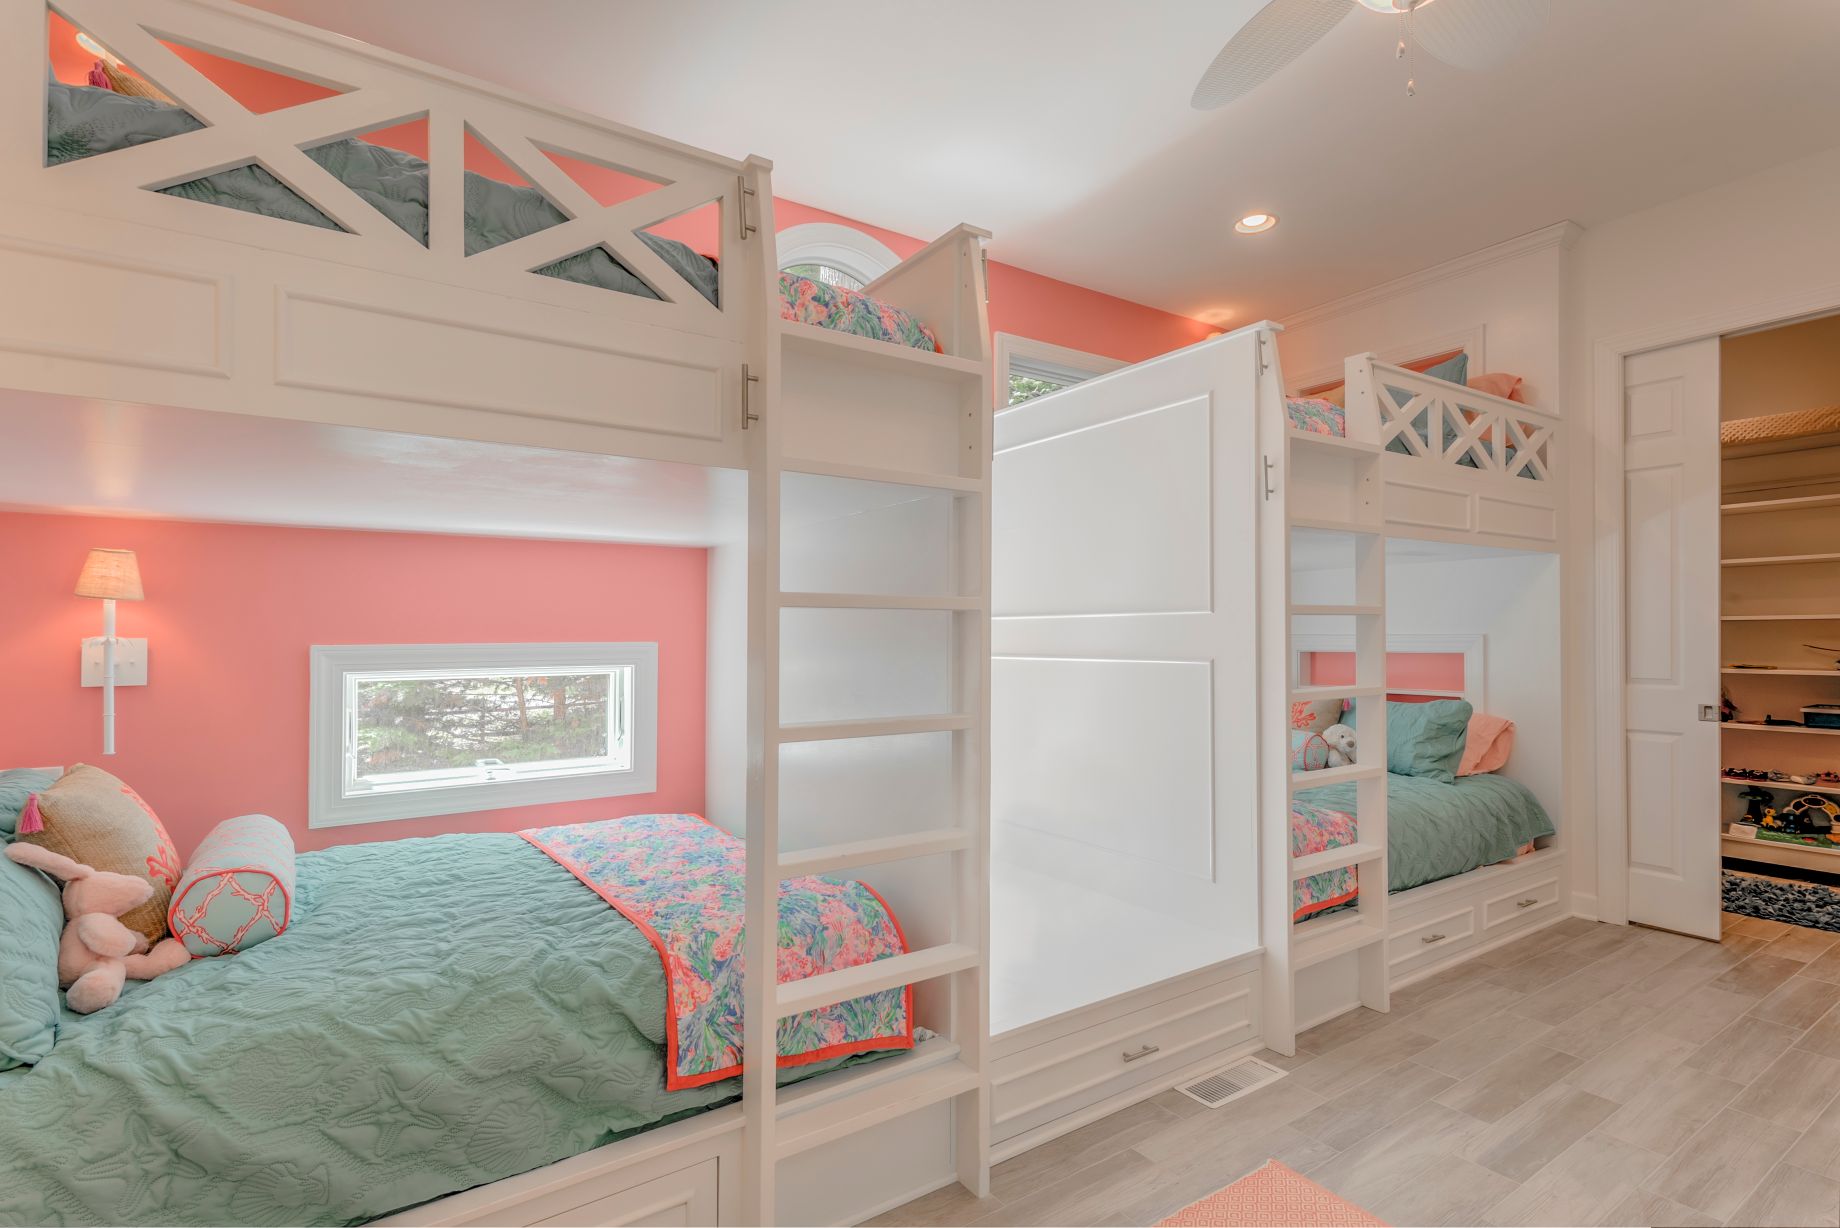 Addition in Juniper Court, Ocean Pines MD - Kids Bedroom with Bunk Beds, Coral Wall Paint and White Wooden Ladders